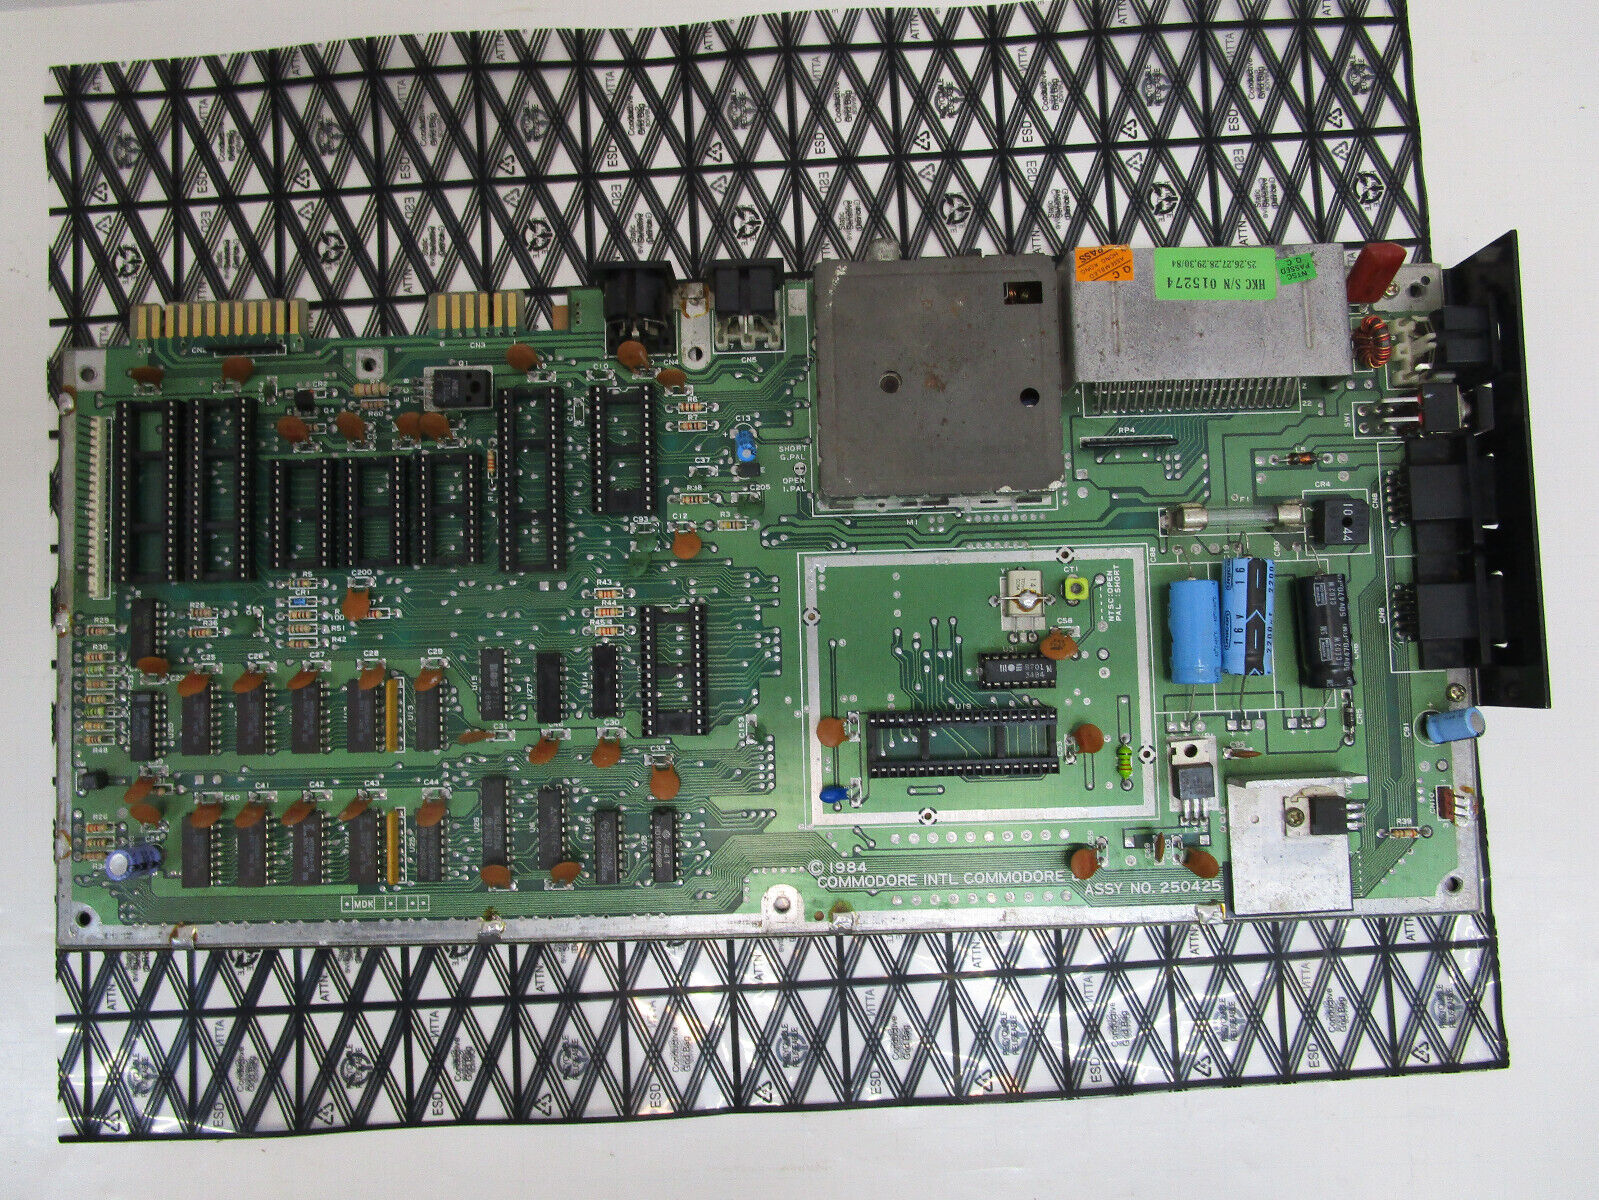 COMMODORE 64 BOARD 250425 MISSING ALL BIG ICS TESTED AND WORKING LOT #39